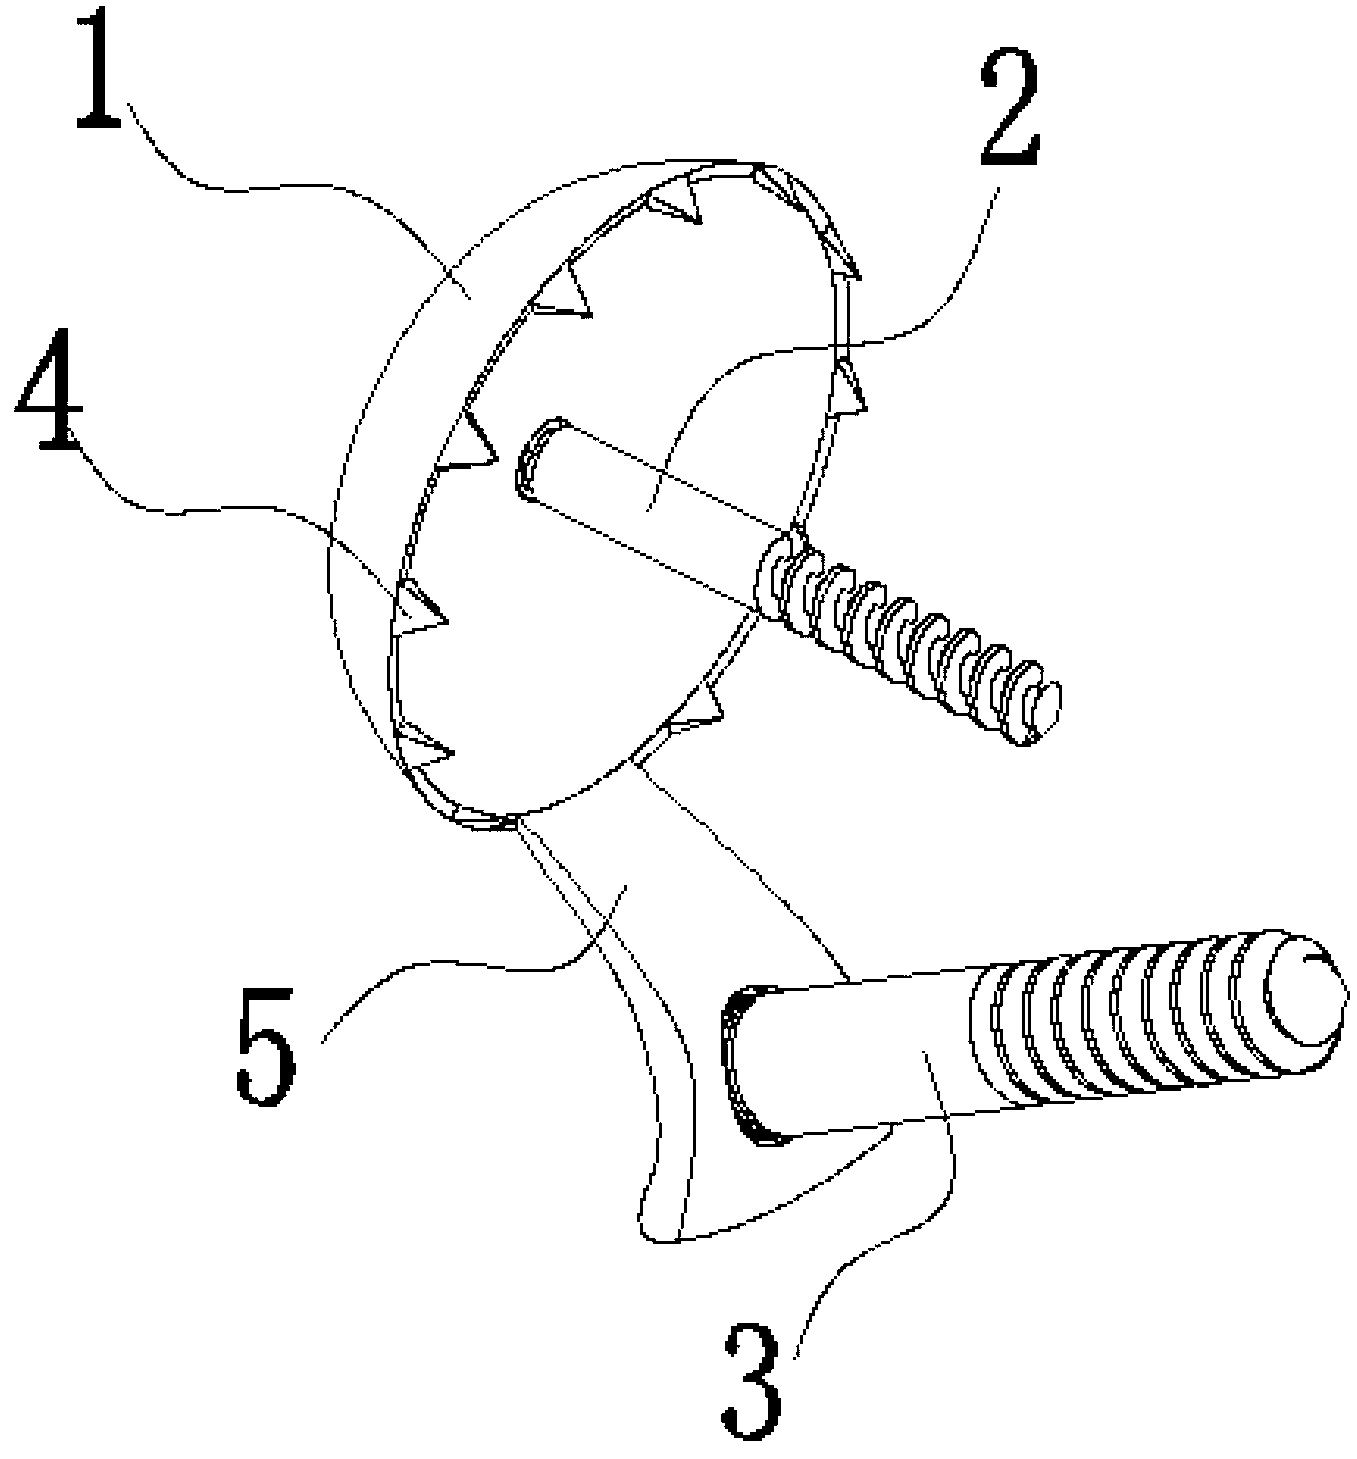 Novel toothed screw pad assembly for cure of avulsion fracture